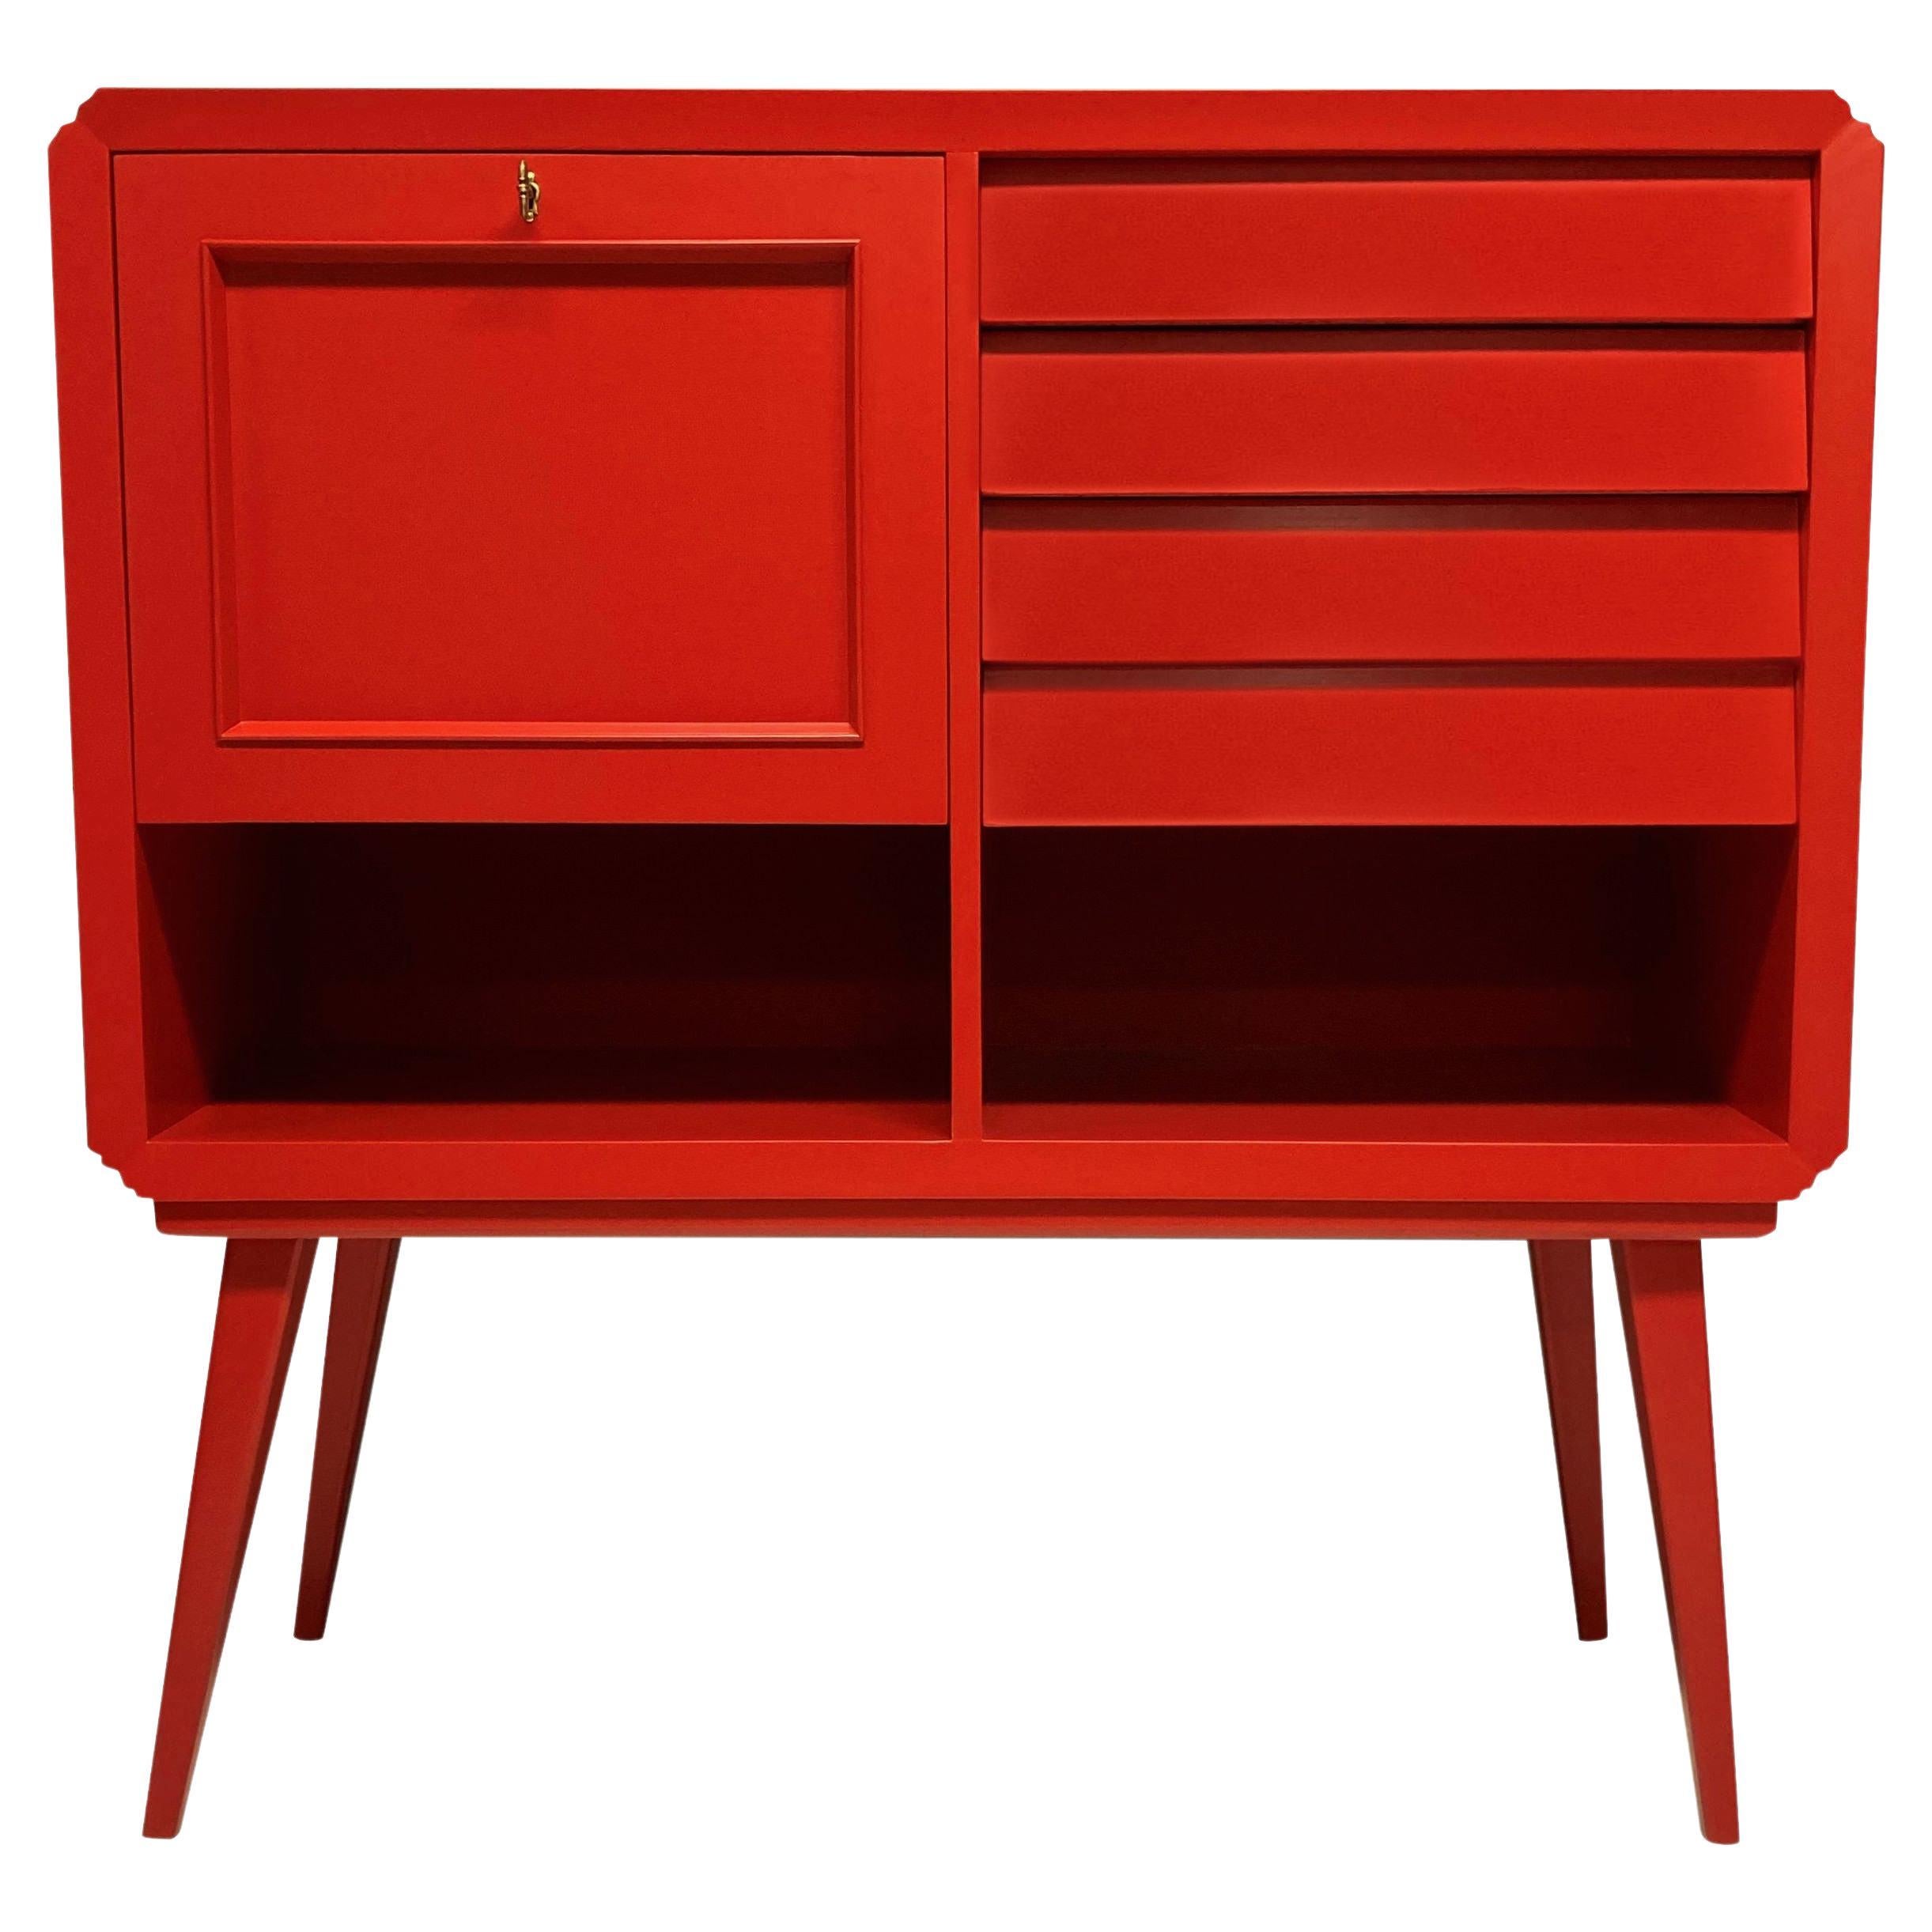 Italian Midcentury Scarlet Lacquered Bar Cabinet